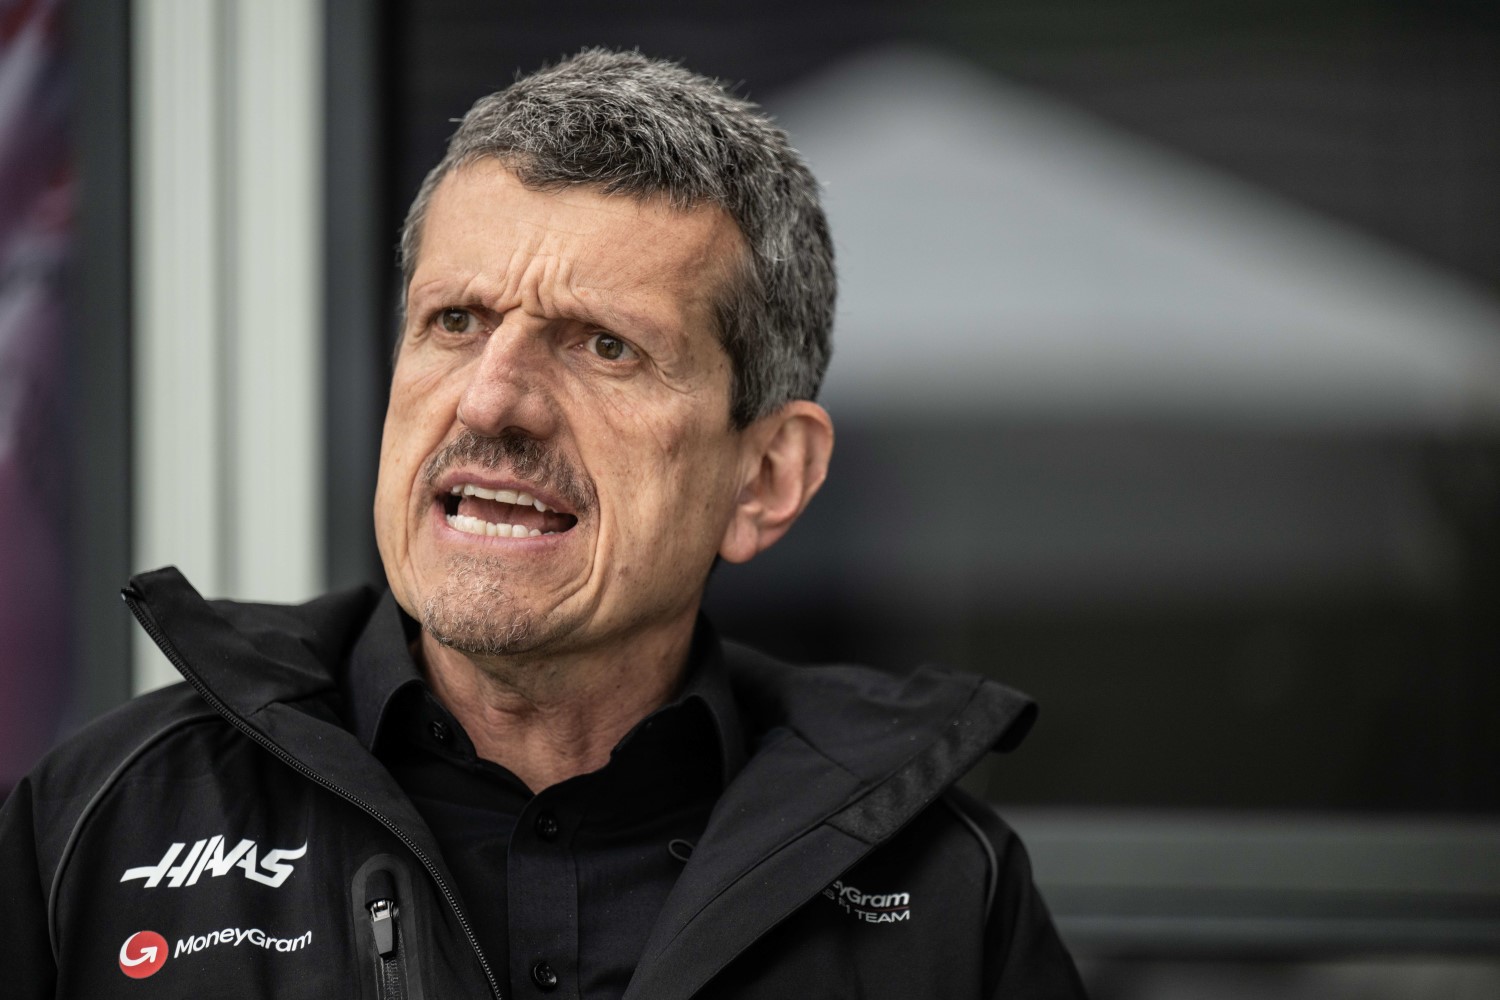 Guenther Steiner, Team Principal, Haas F1 Team speaks to the media during the Australian GP at Melbourne Grand Prix Circuit on Thursday March 30, 2023 in Melbourne, Australia. (Photo by Simon Galloway / LAT Images)